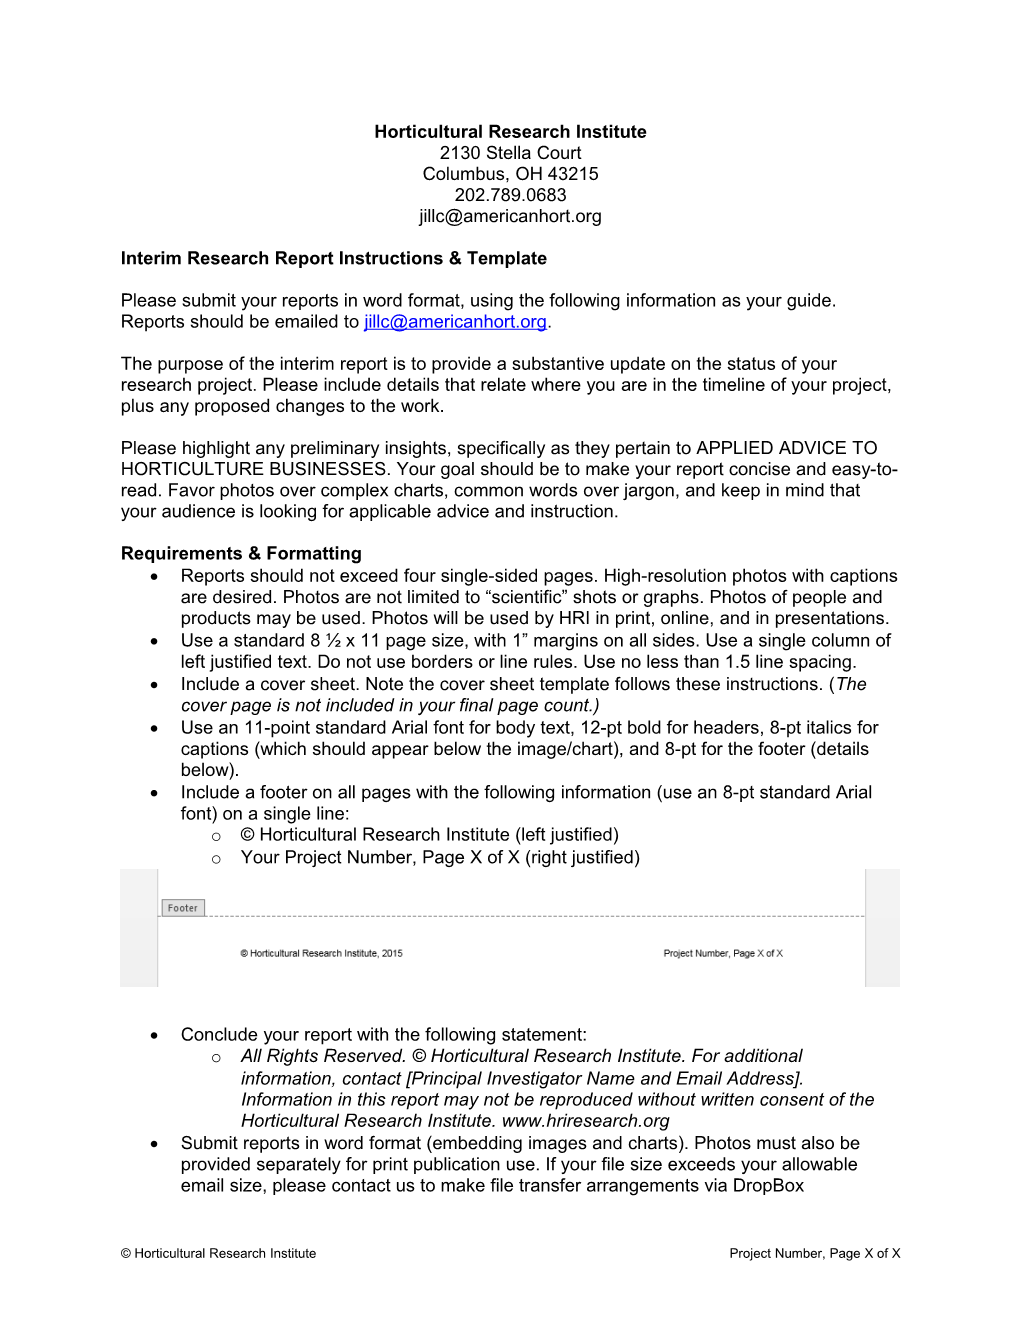 Interim Research Report Instructions & Template